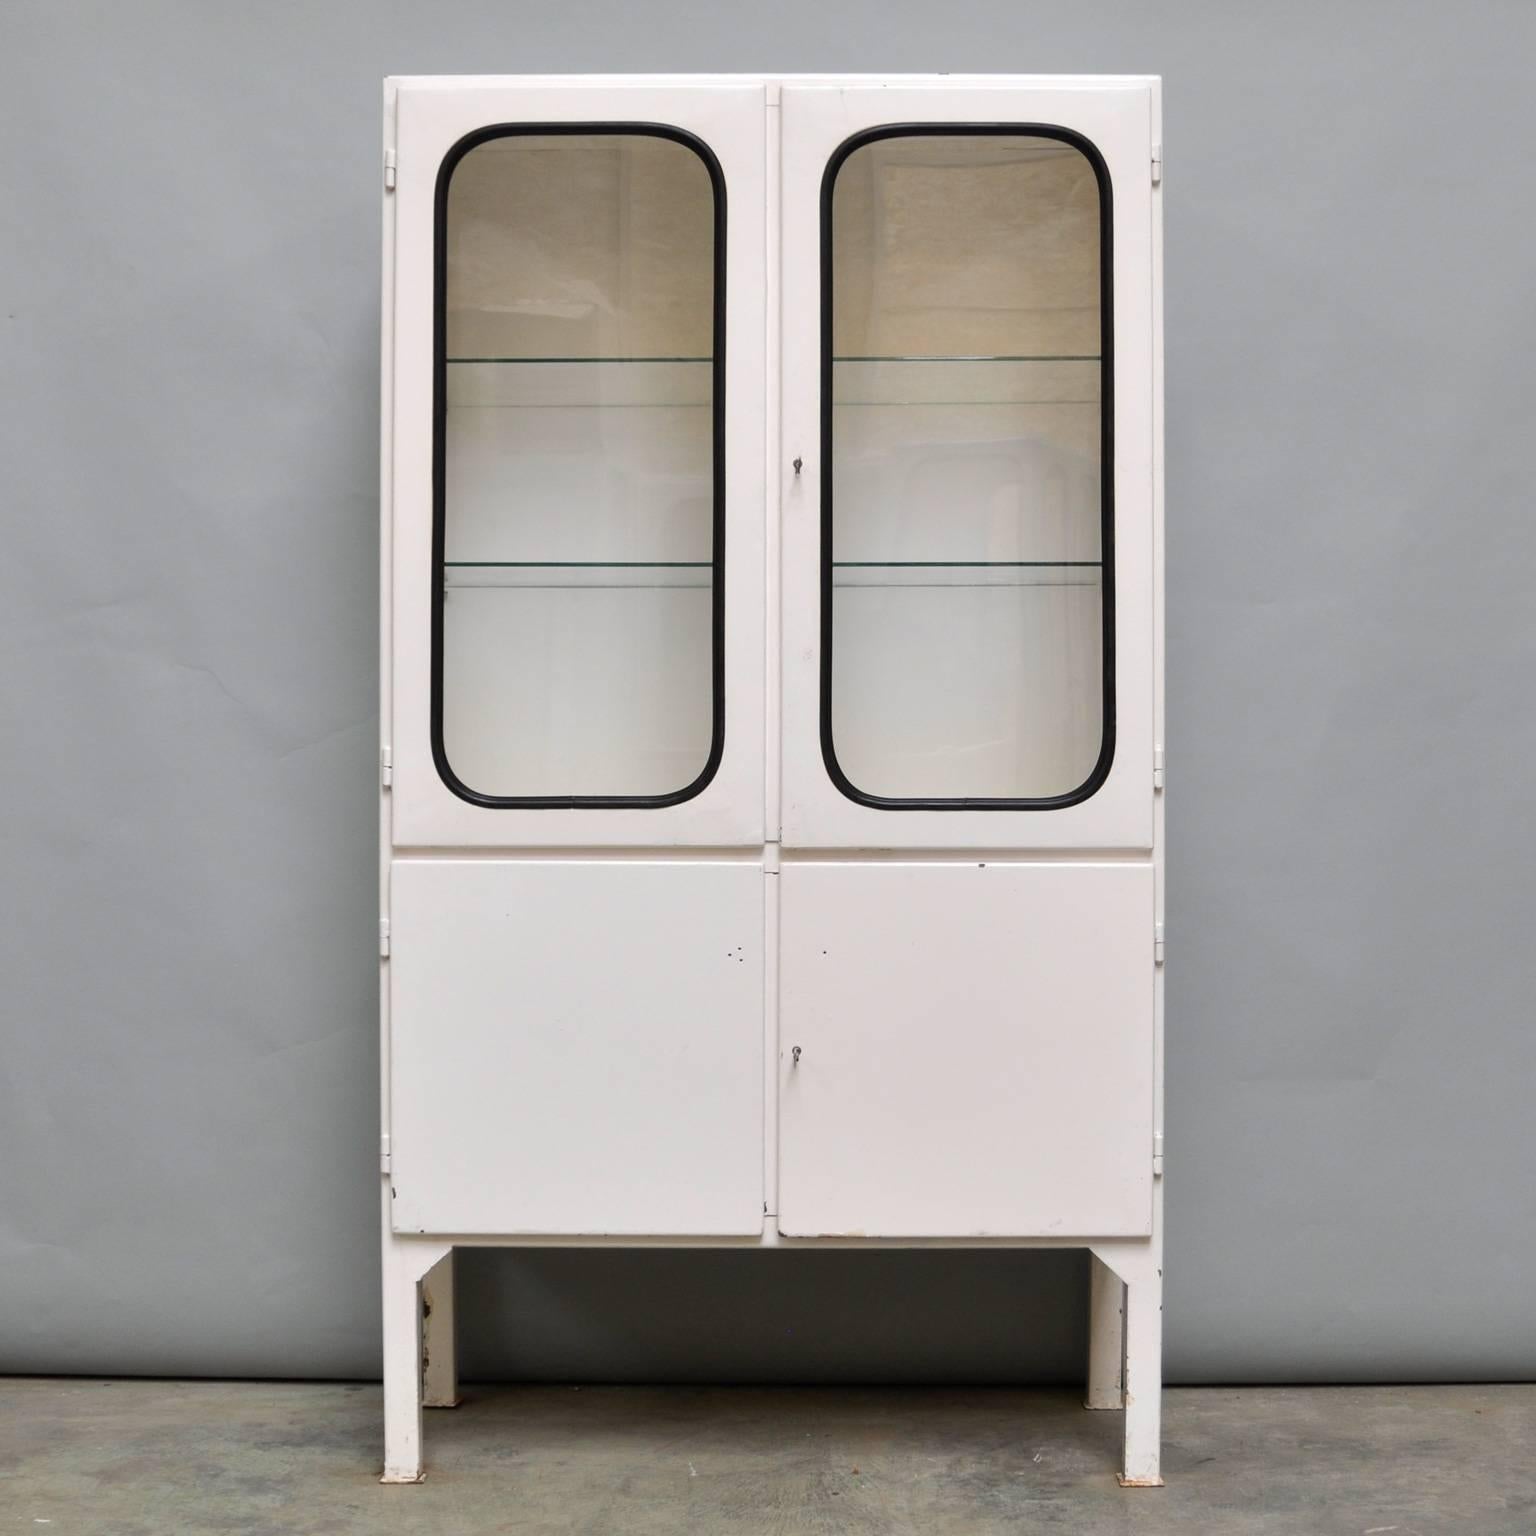 This medicine cabinet was designed in the 1970s and produced in 1975 in Hungary. It is made from iron and antique glass, with the glass panes held in place by a black rubber strip. The cabinet features two adjustable glass shelves and functioning